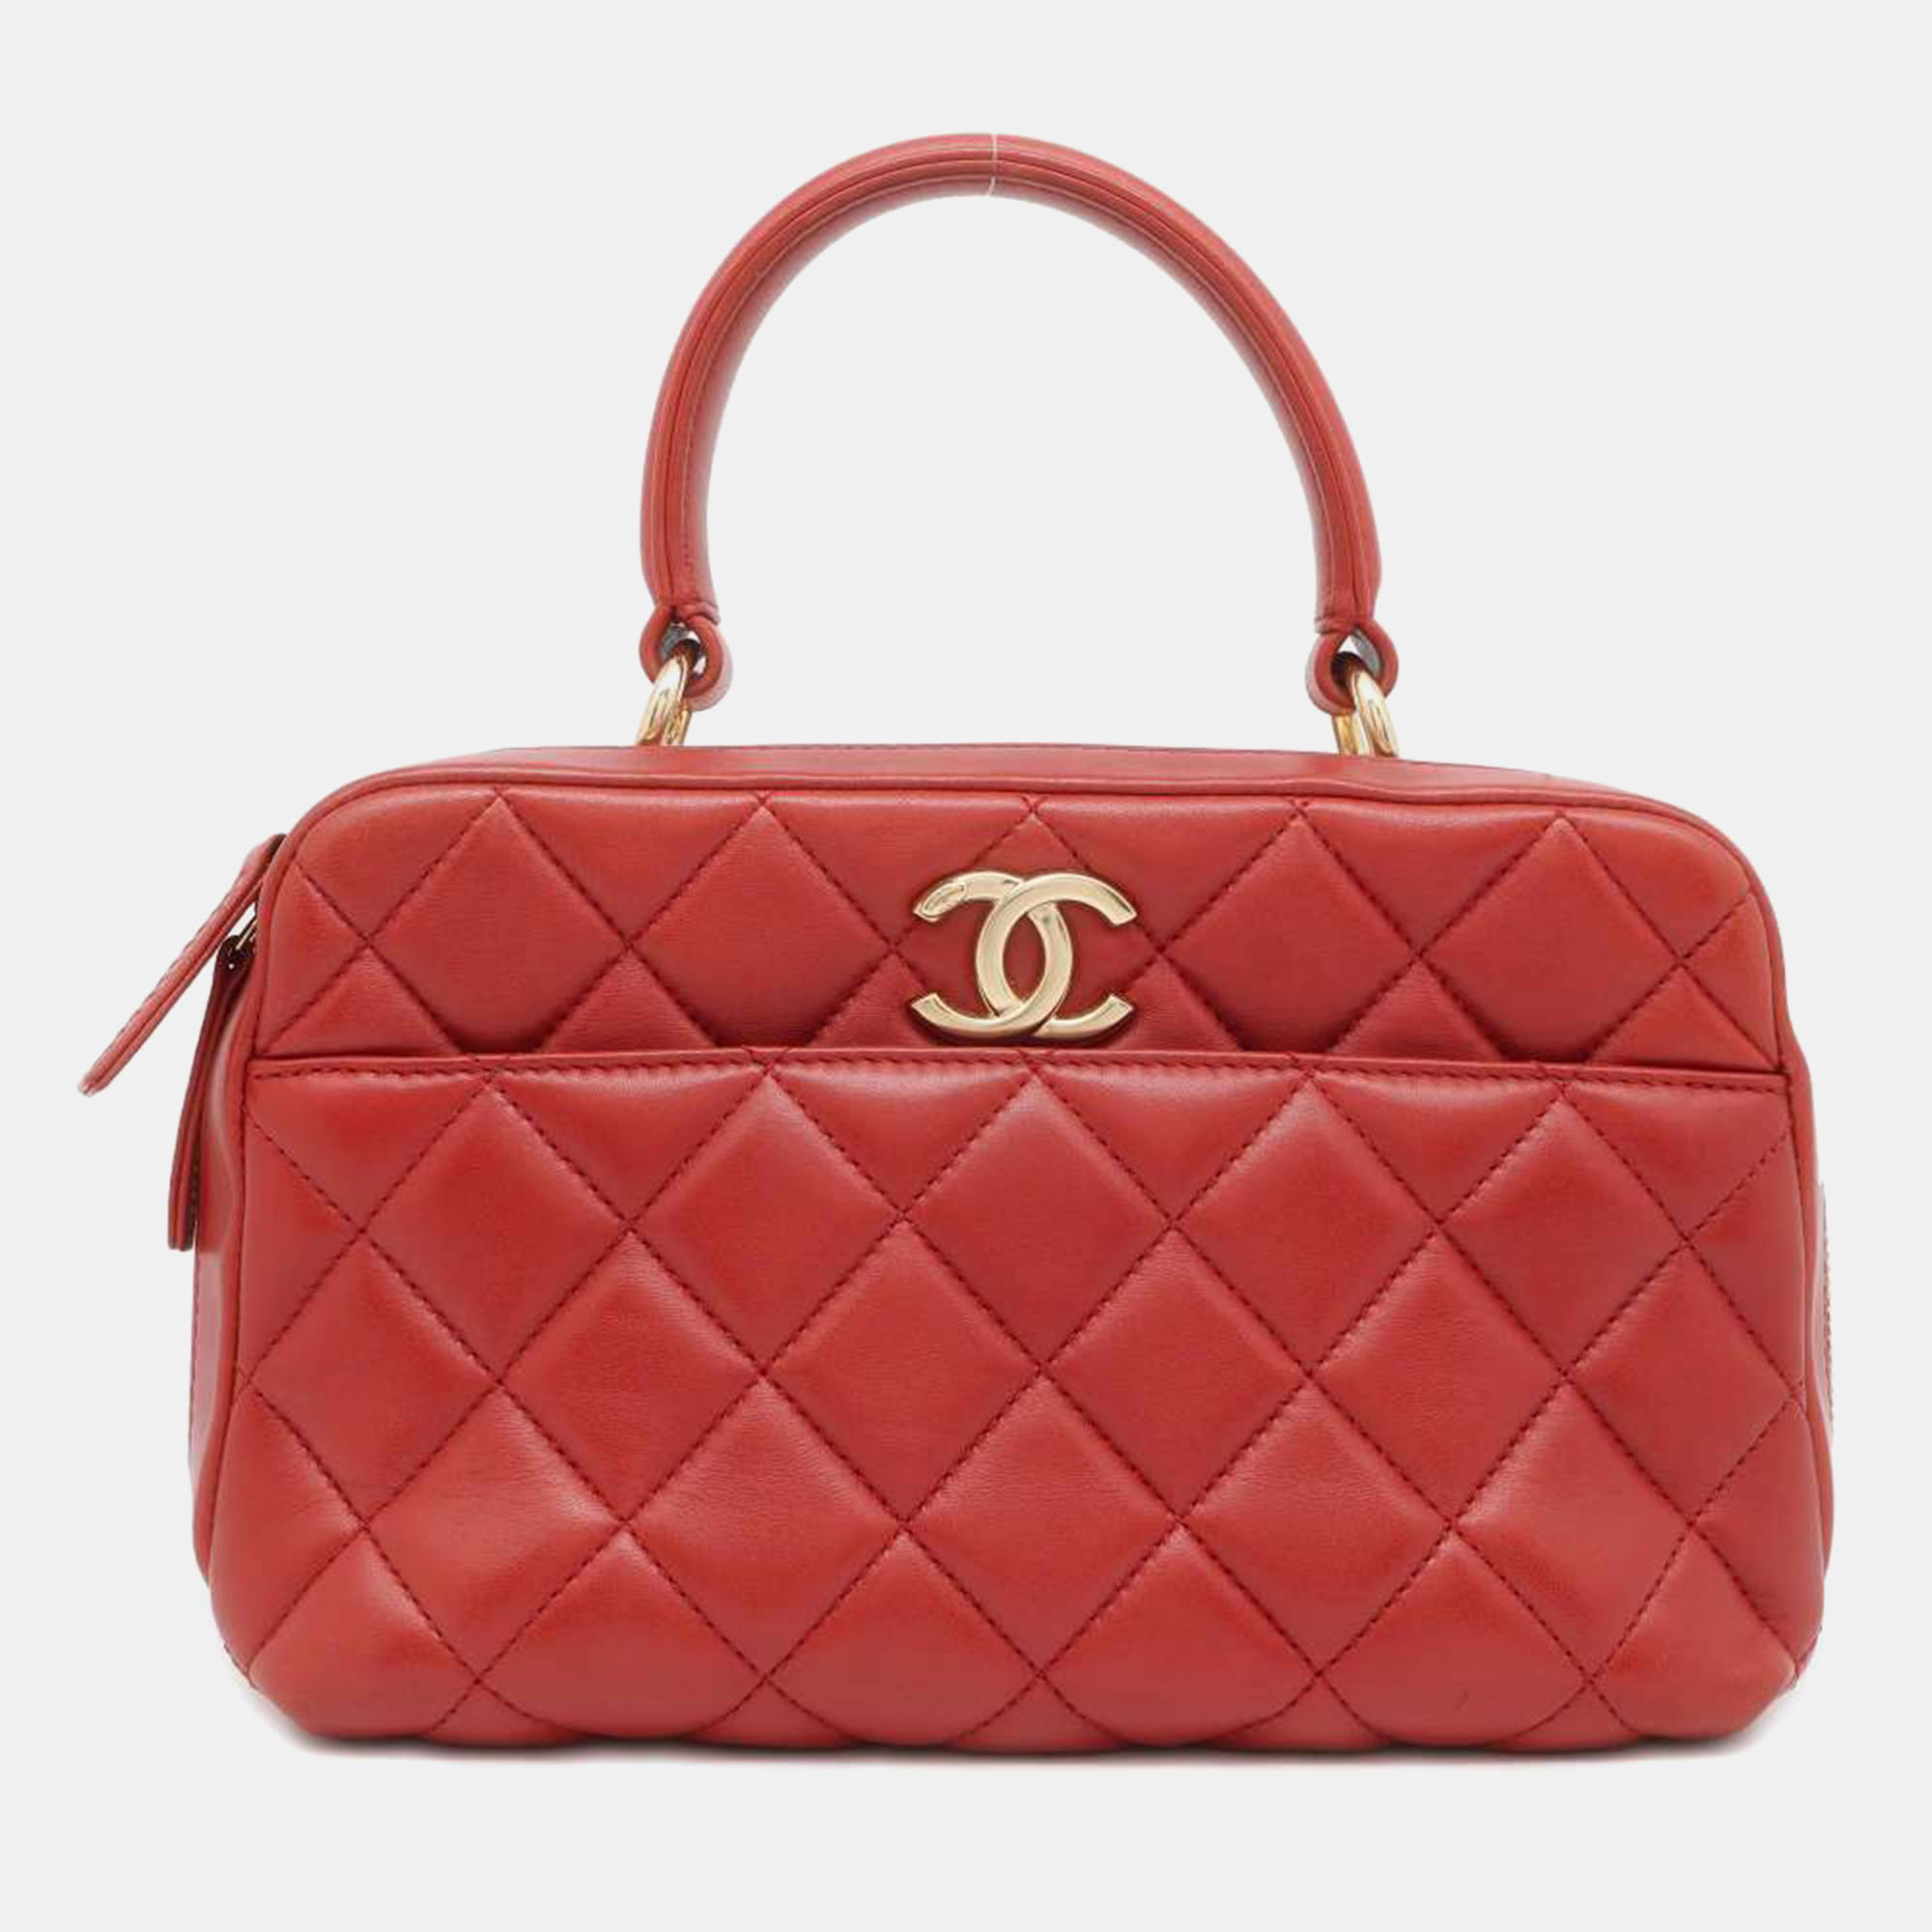 Chanel red lambskin leather bowling bag